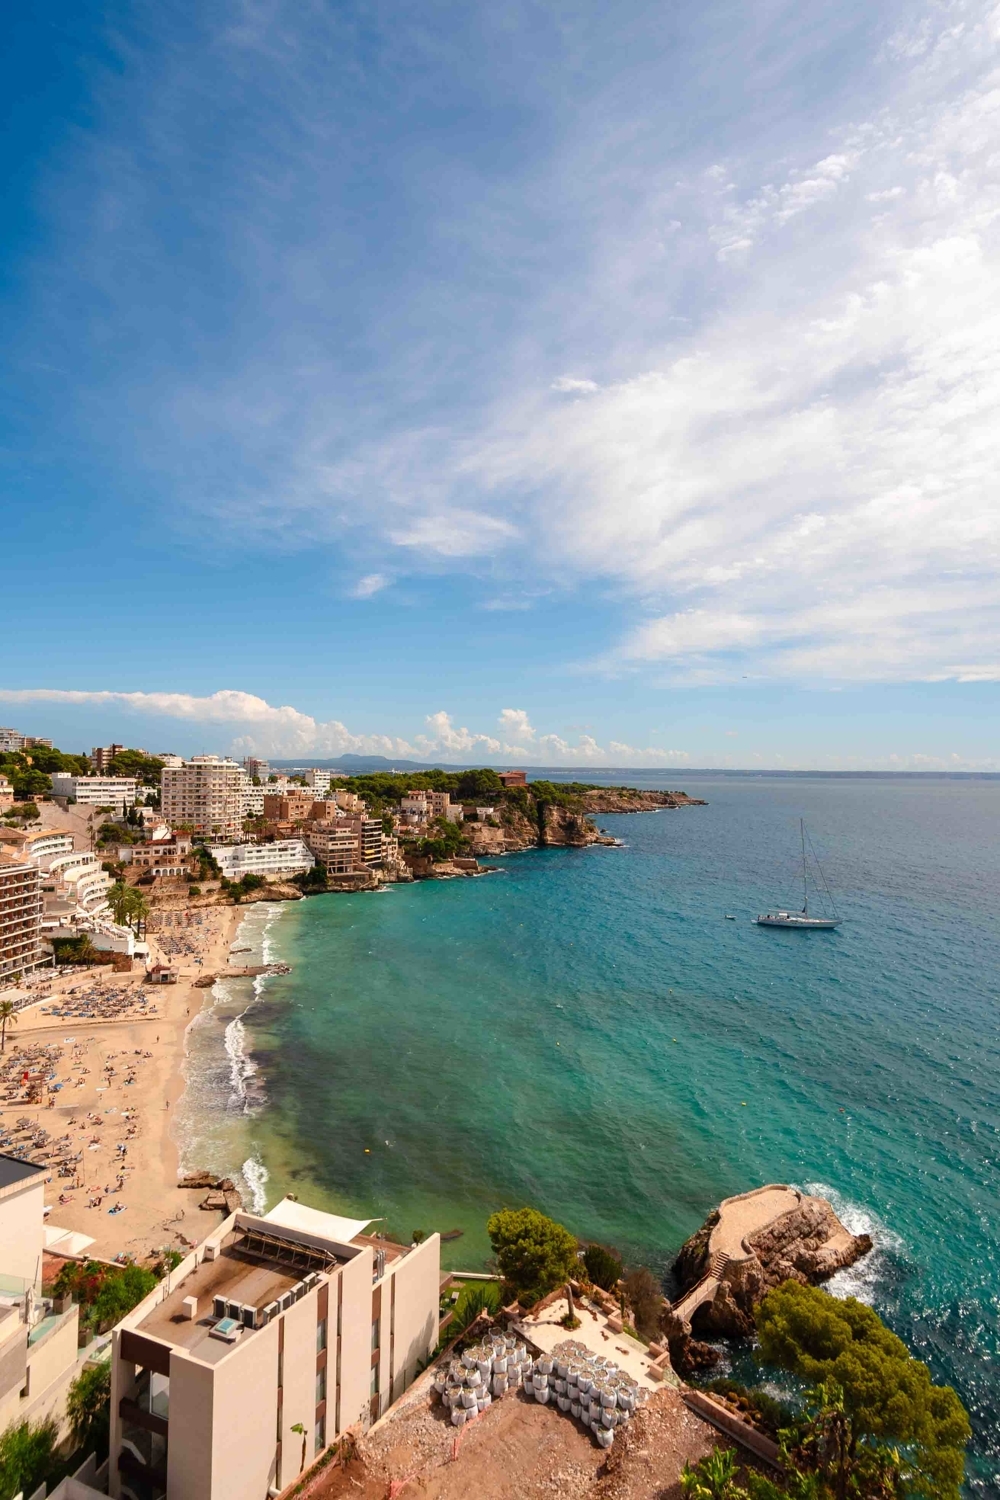 STUNNING SEASIDE APARTMENT WITH SPECTACULAR VIEWS IN PRIME LOCATION AT CALA MAYOR